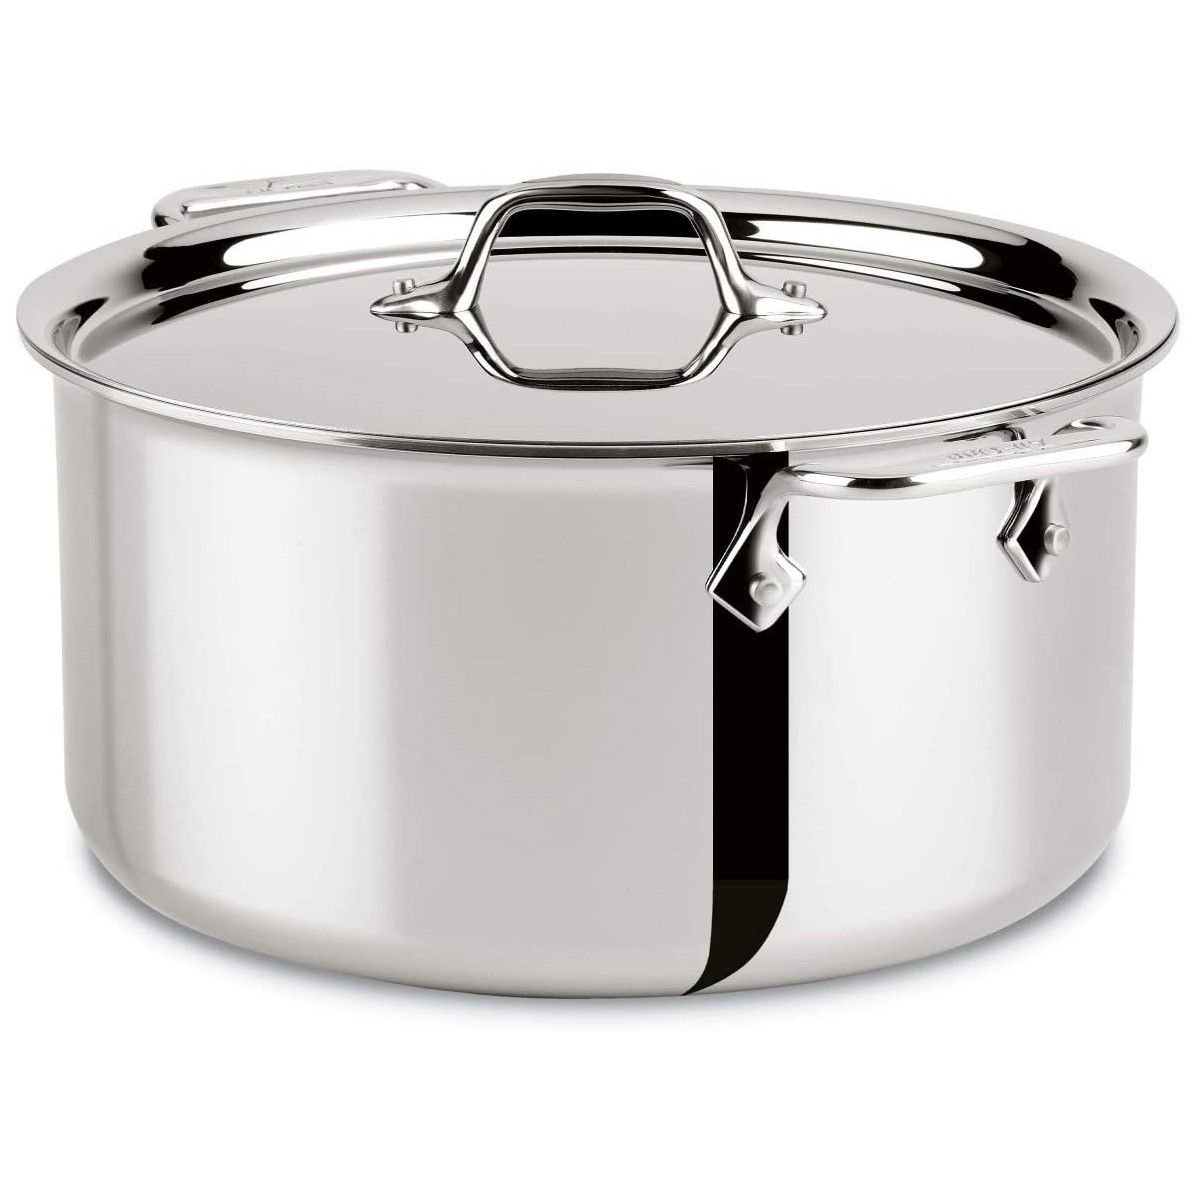 All-Clad D3 Stainless Steel Anniversary Casserole, 4 qt., Stainless Steel